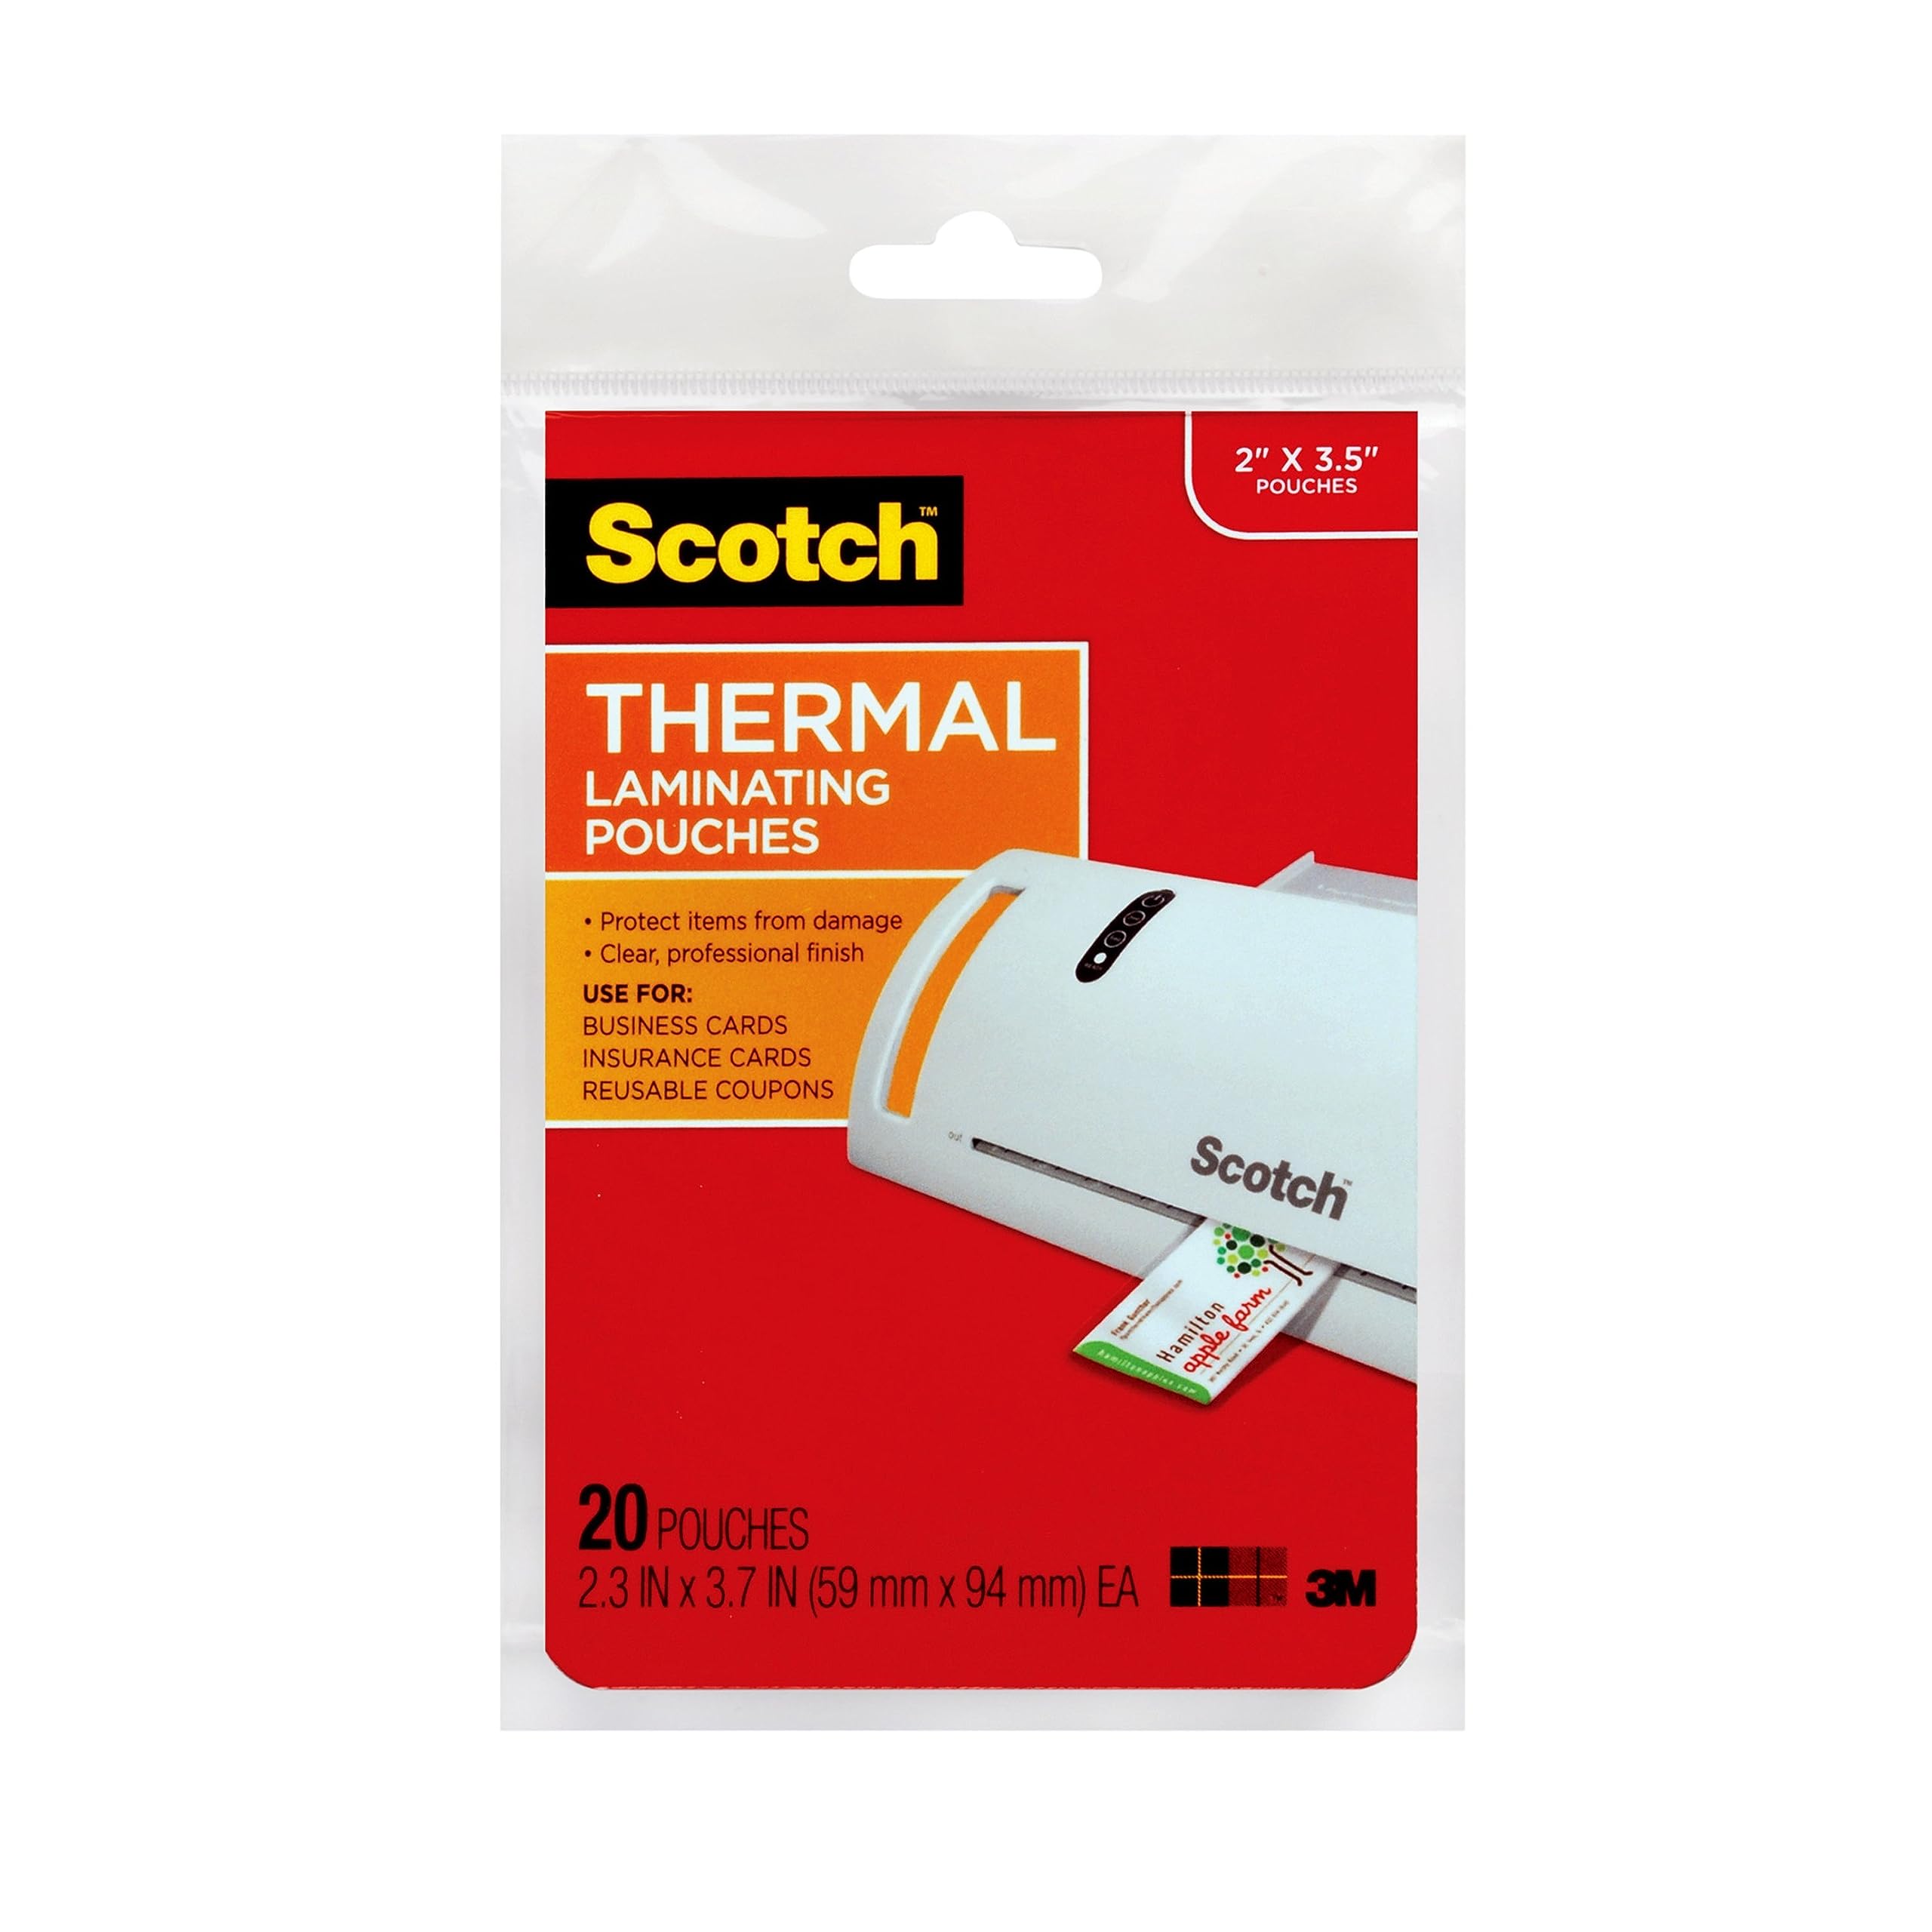 20-Count Scotch Thermal Laminating Pouches (Business Card Size, 2.3" x 3.7") $1.48 + Free Shipping w/ Prime or on $35+